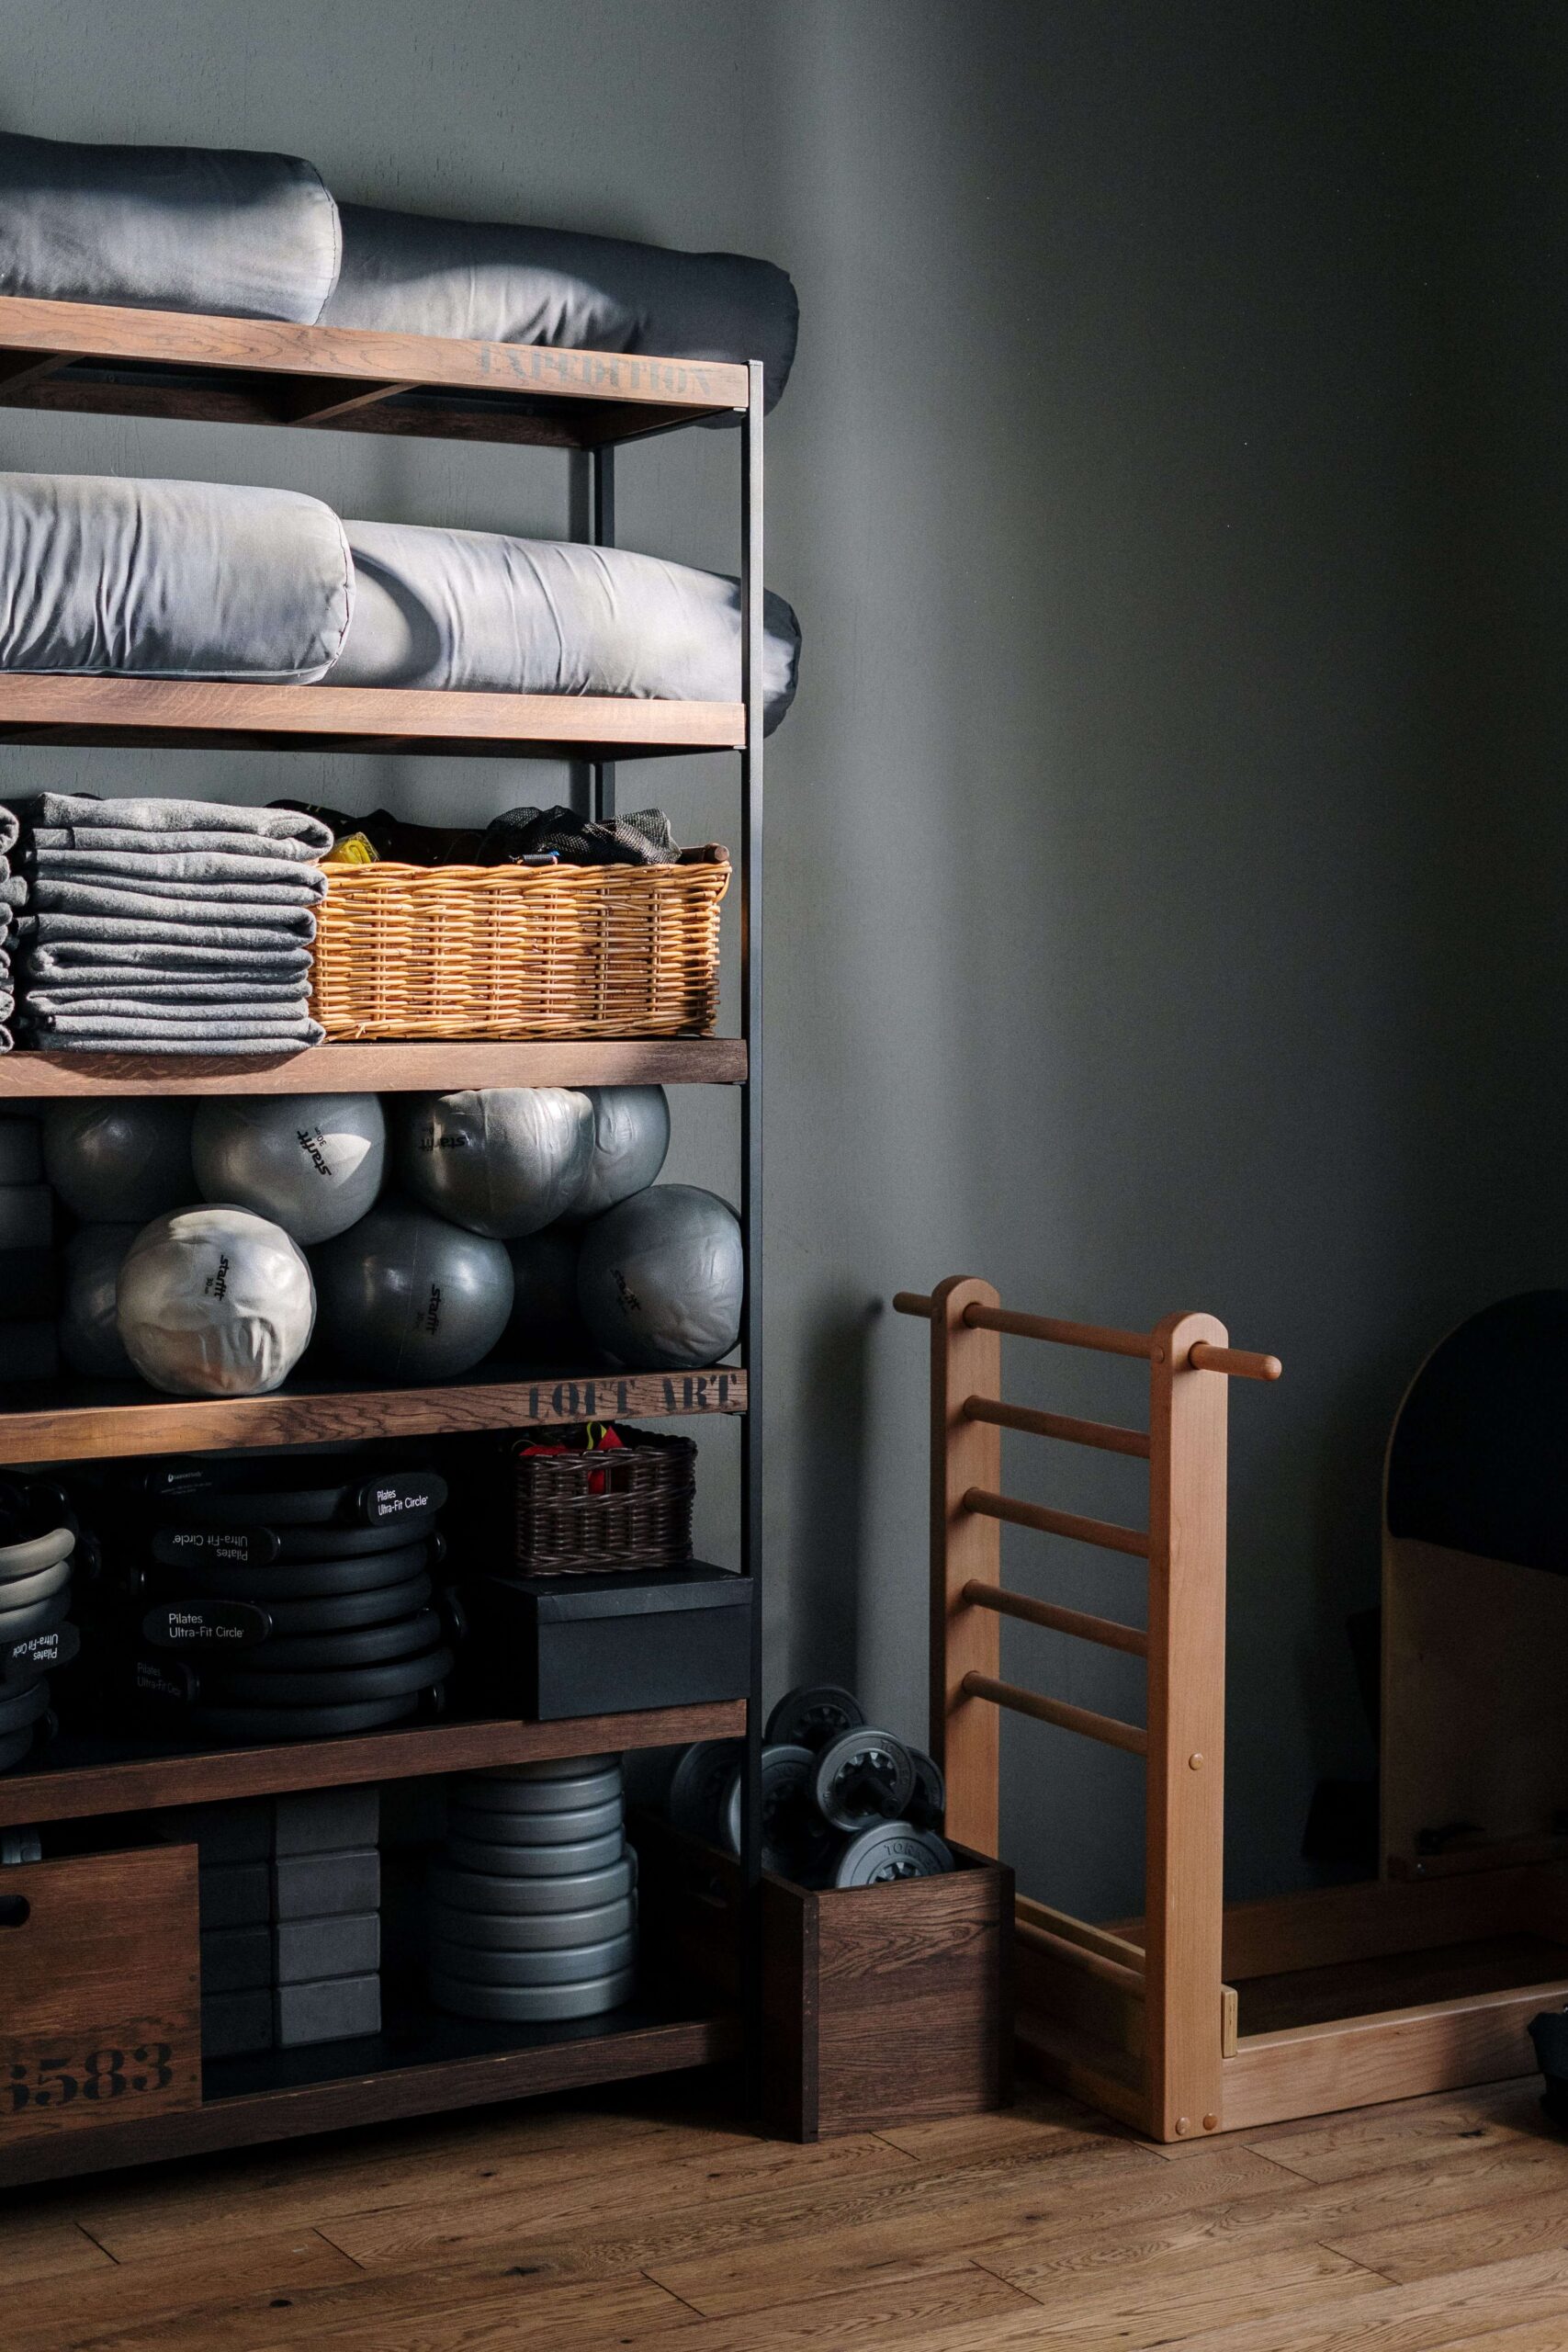 4. Clean your home by categorizing. shows gym equipment on a shelves grouped by item, use, and size.